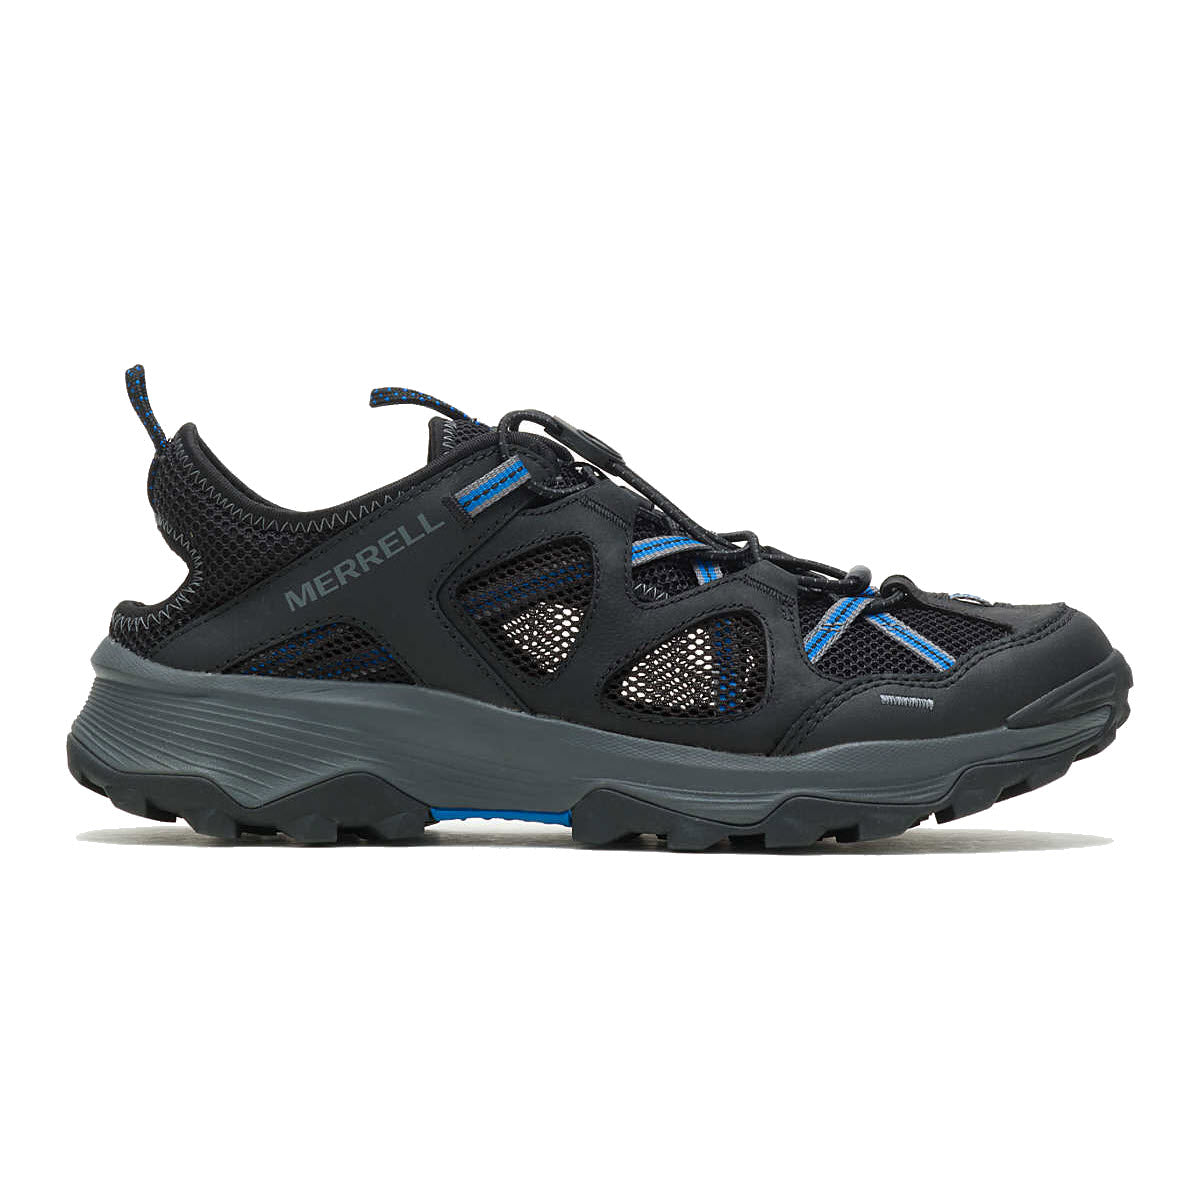 A Merrell brand hiking shoe with durable leather uppers and blue accents, displayed against a white background.